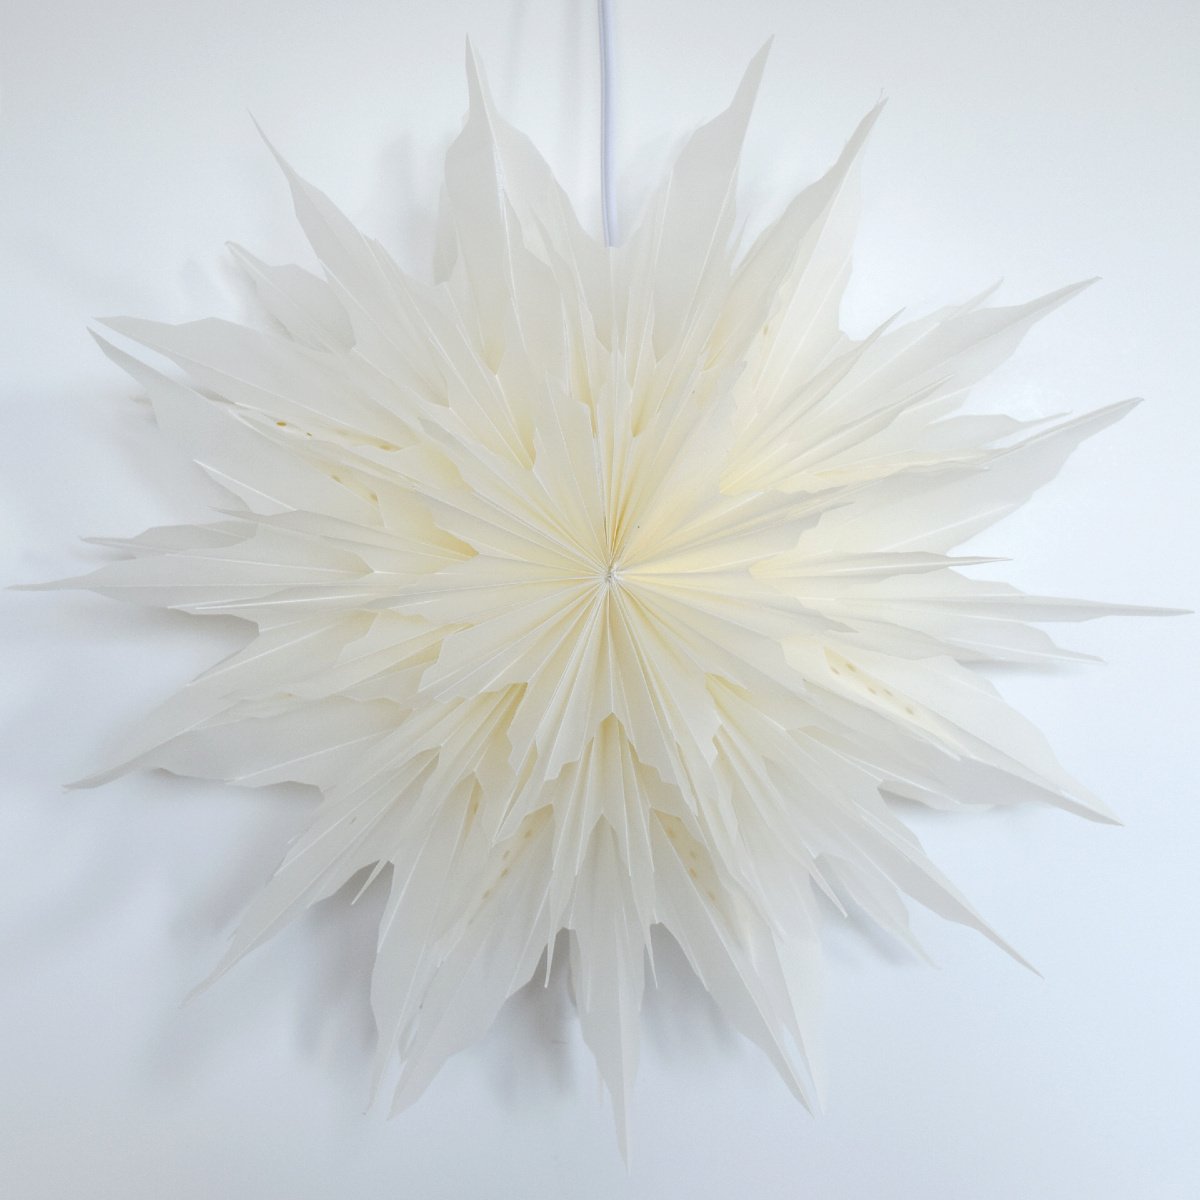 32&quot; White Snowdrift Snowflake Star Lantern Pizzelle Design - Great With or Without Lights - Ideal for Holiday and Snowflake Decorations, Weddings, Parties, and Home Decor